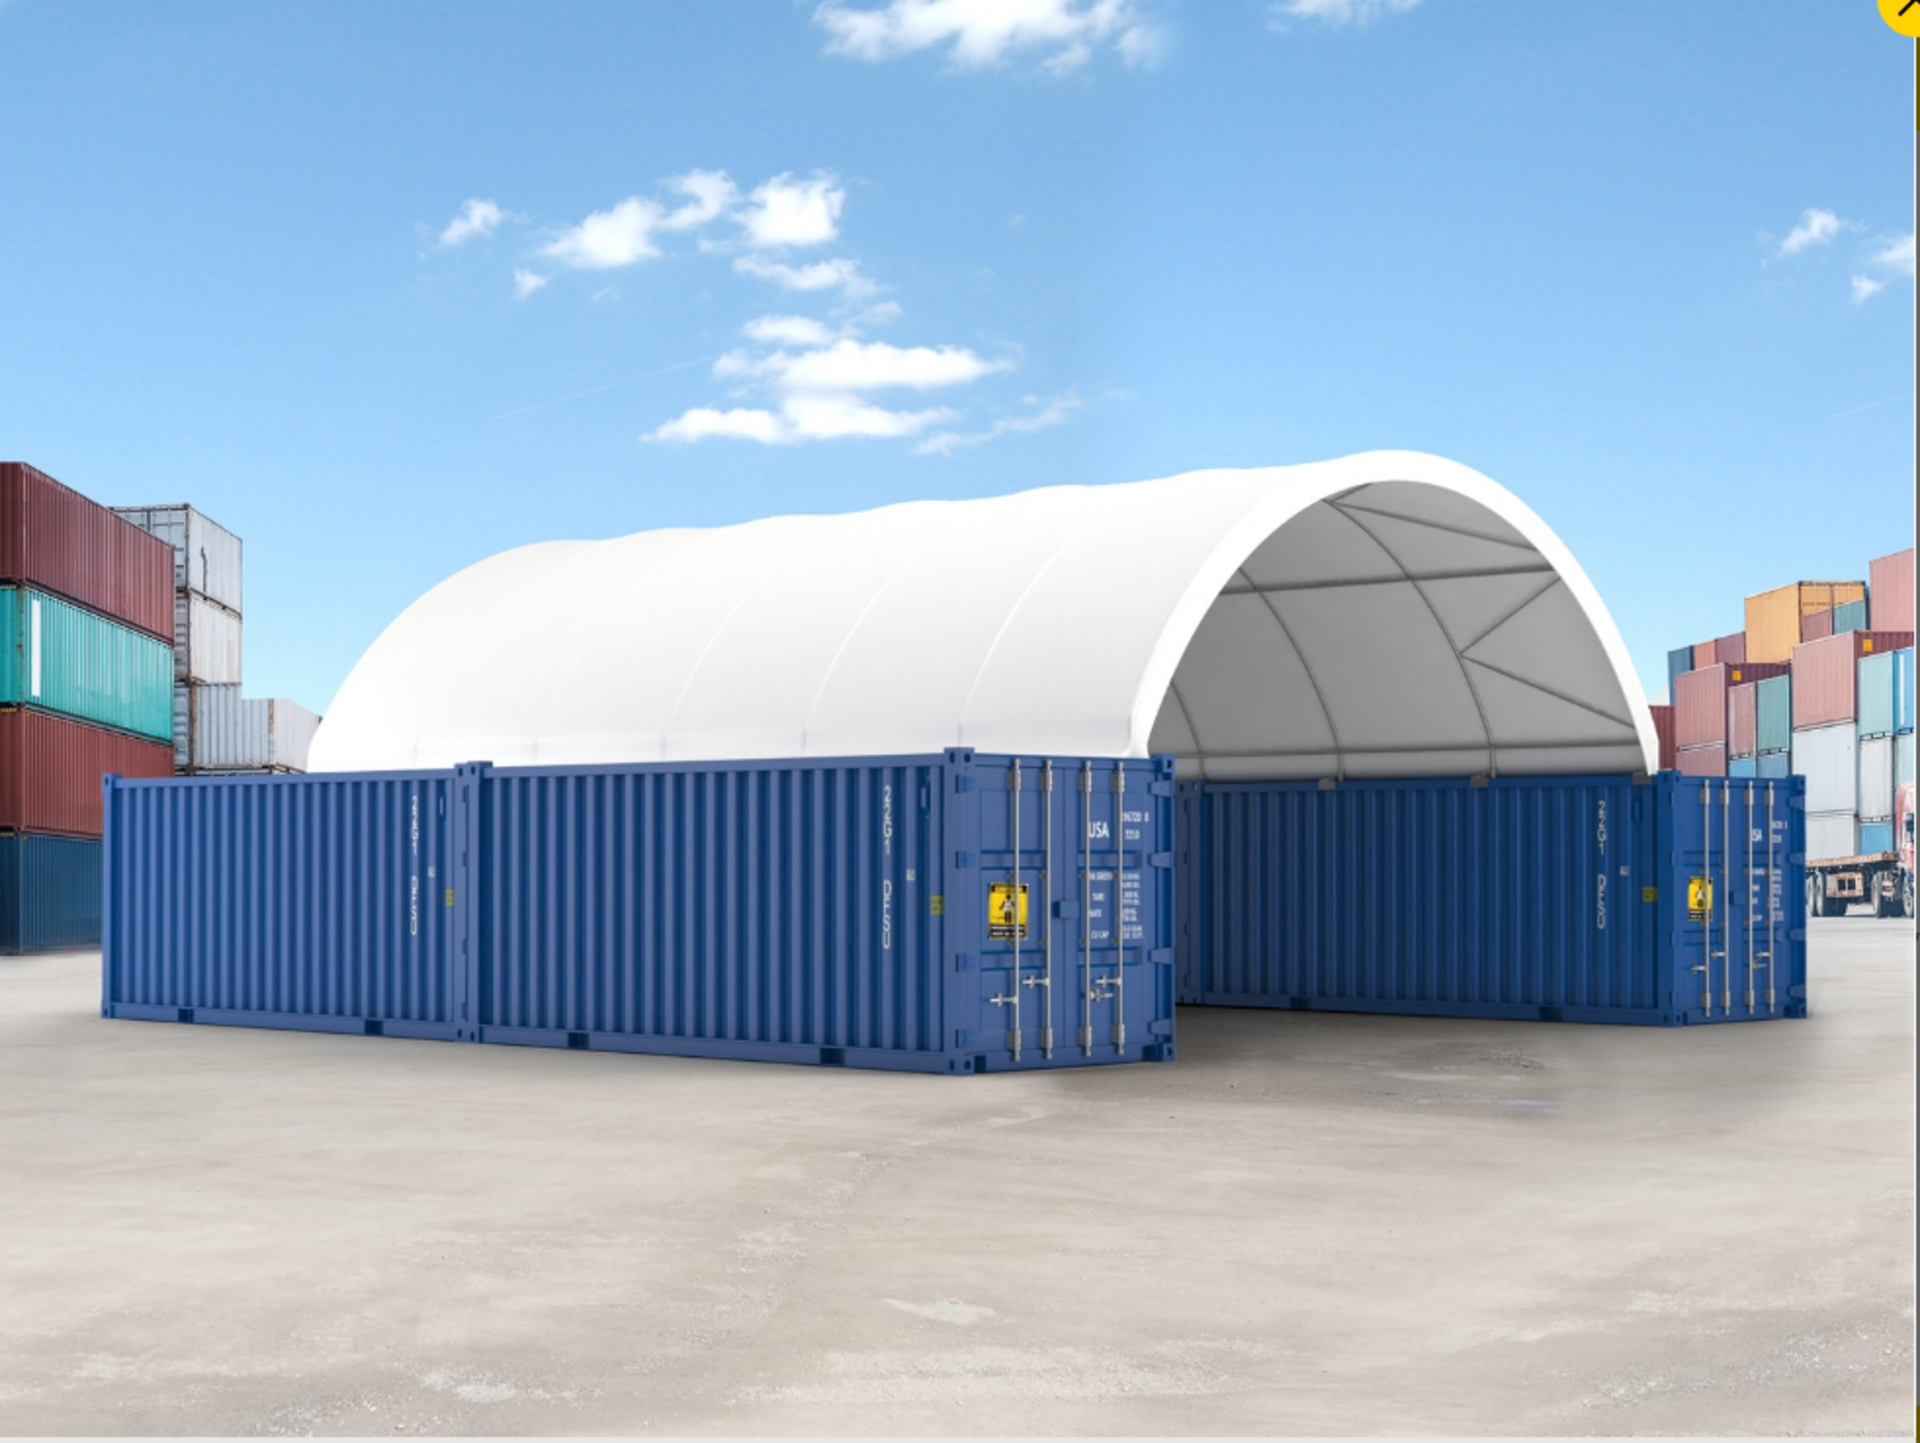 GOLDEN MOUNT Container Shelter - Image 3 of 6